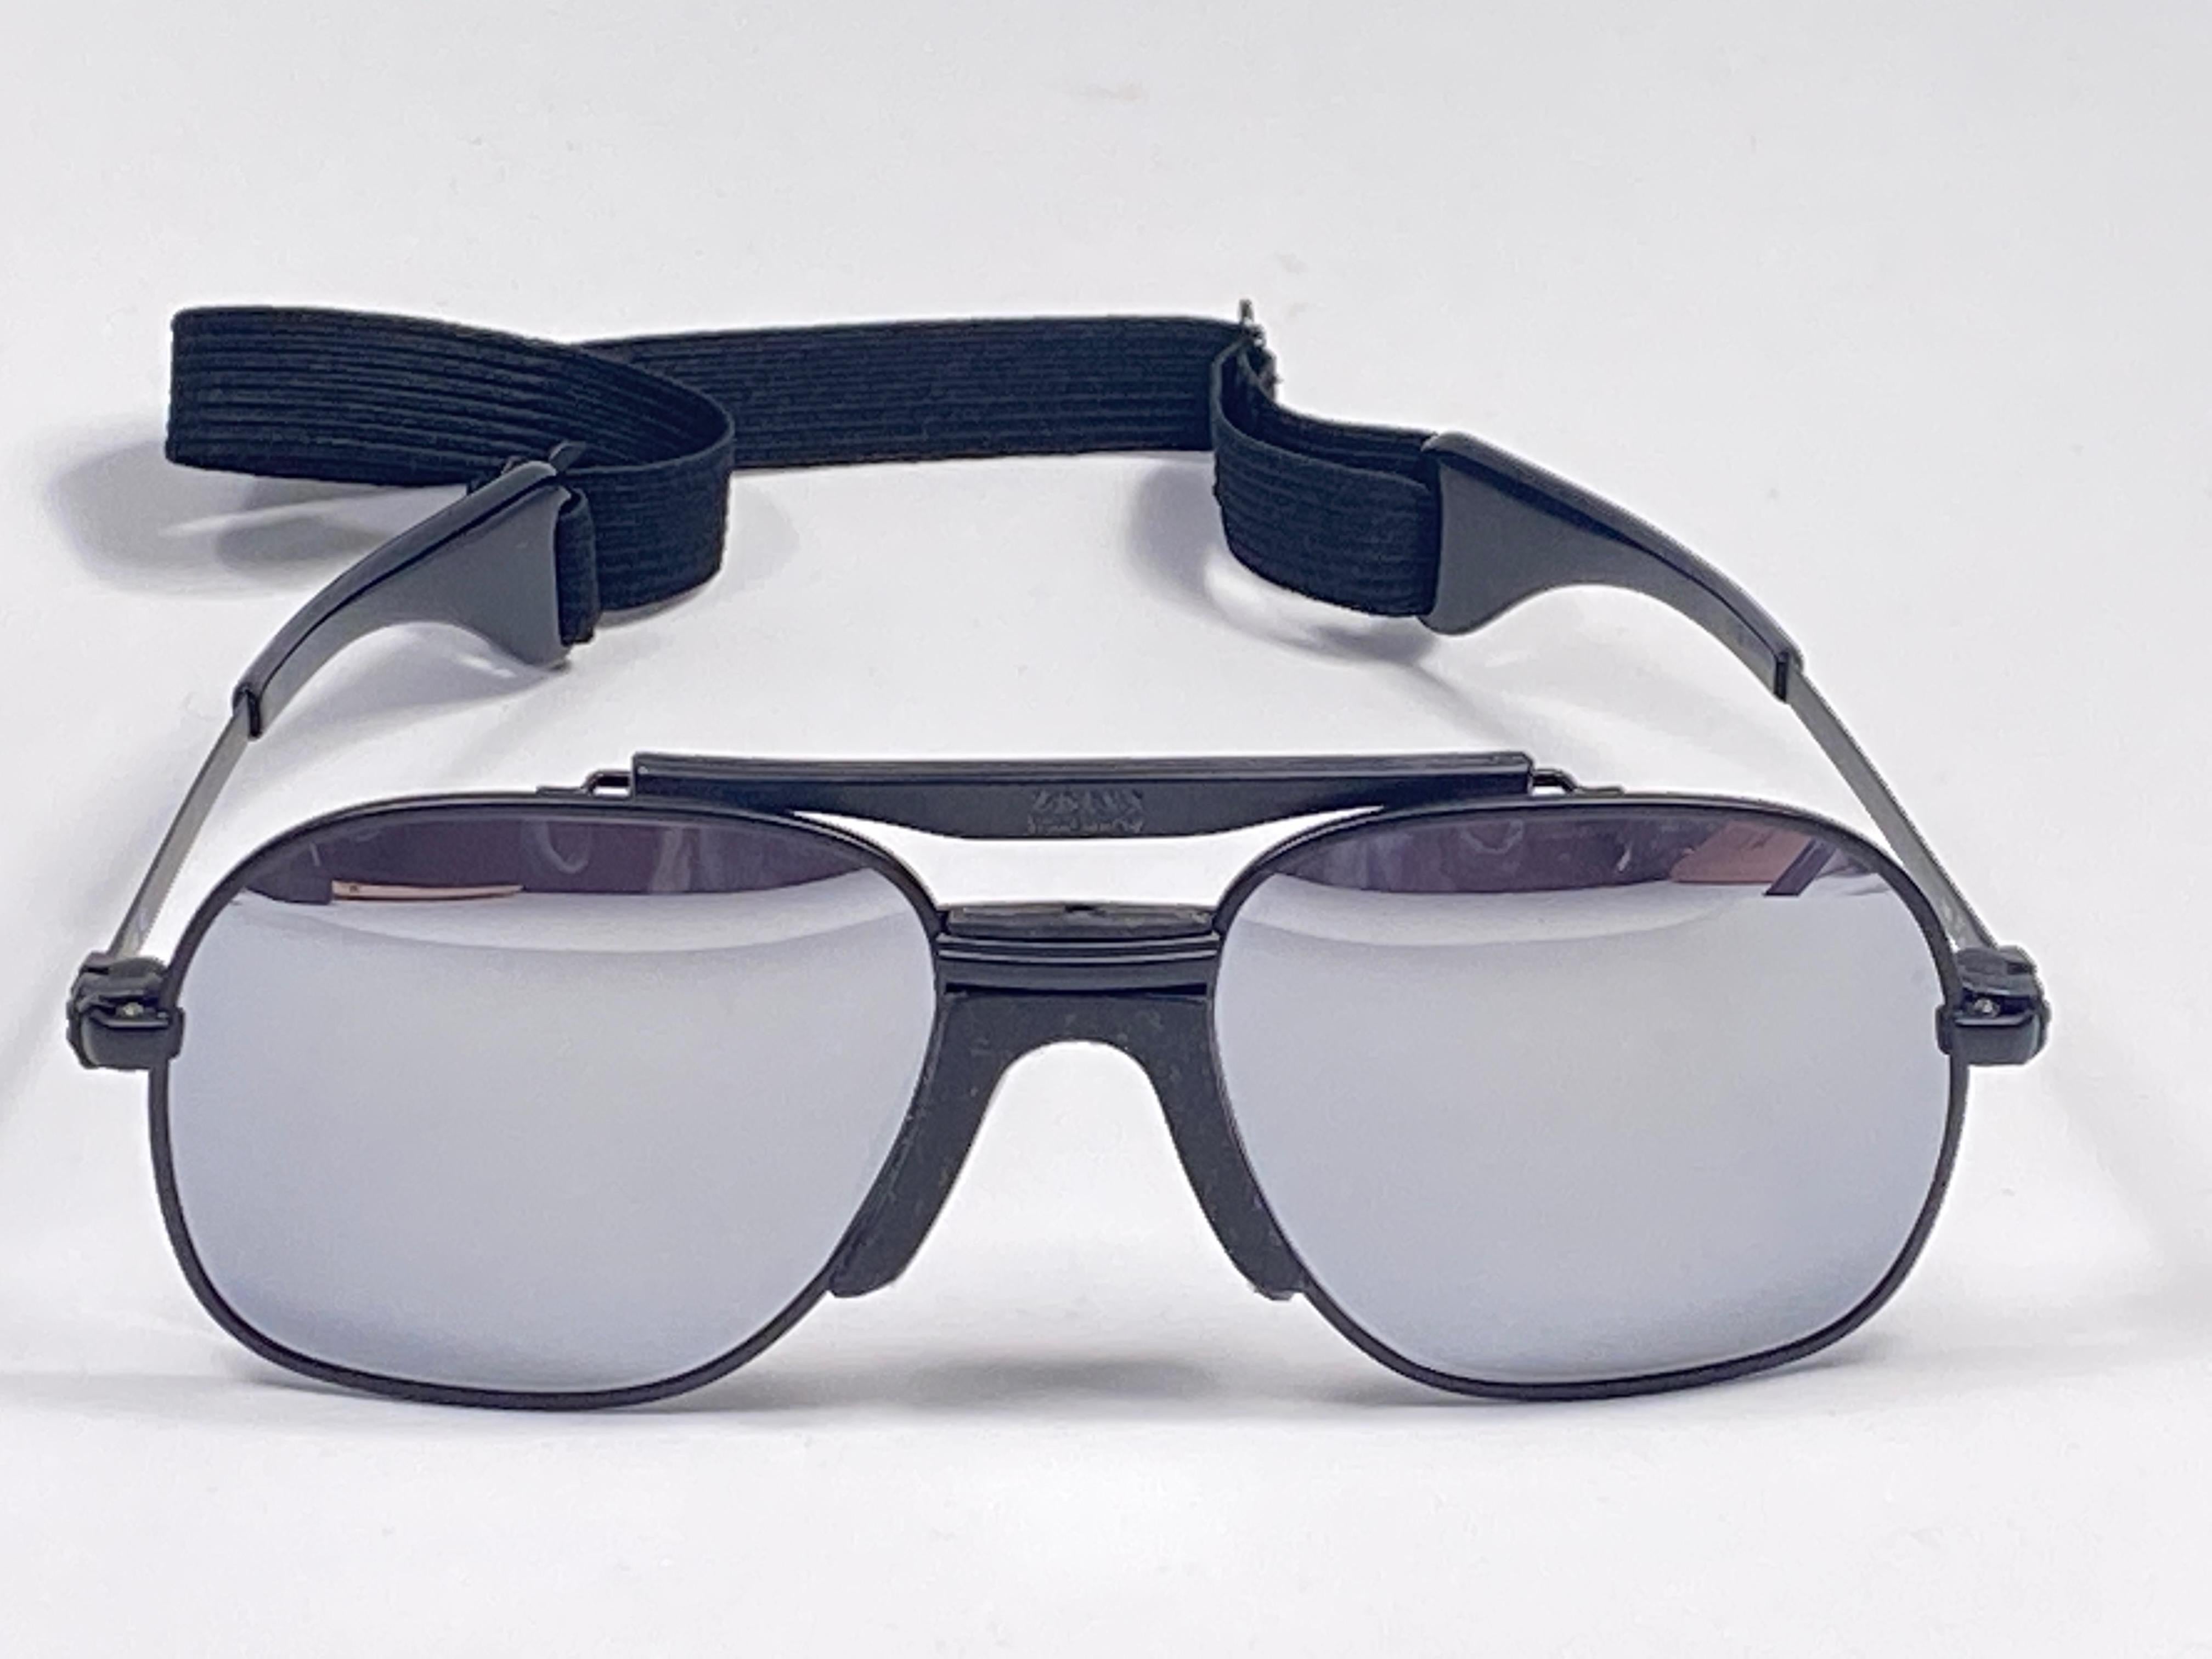 New vintage Zeiss sports oversized black matte frame with full mirror lenses and sports cord.  
Made in West Germany.

This item is new and unworn but may show minor sign of wear due to storage.

MESUREMENTS:

FRONT : 14 CMS

LENS HEIGHT : 5